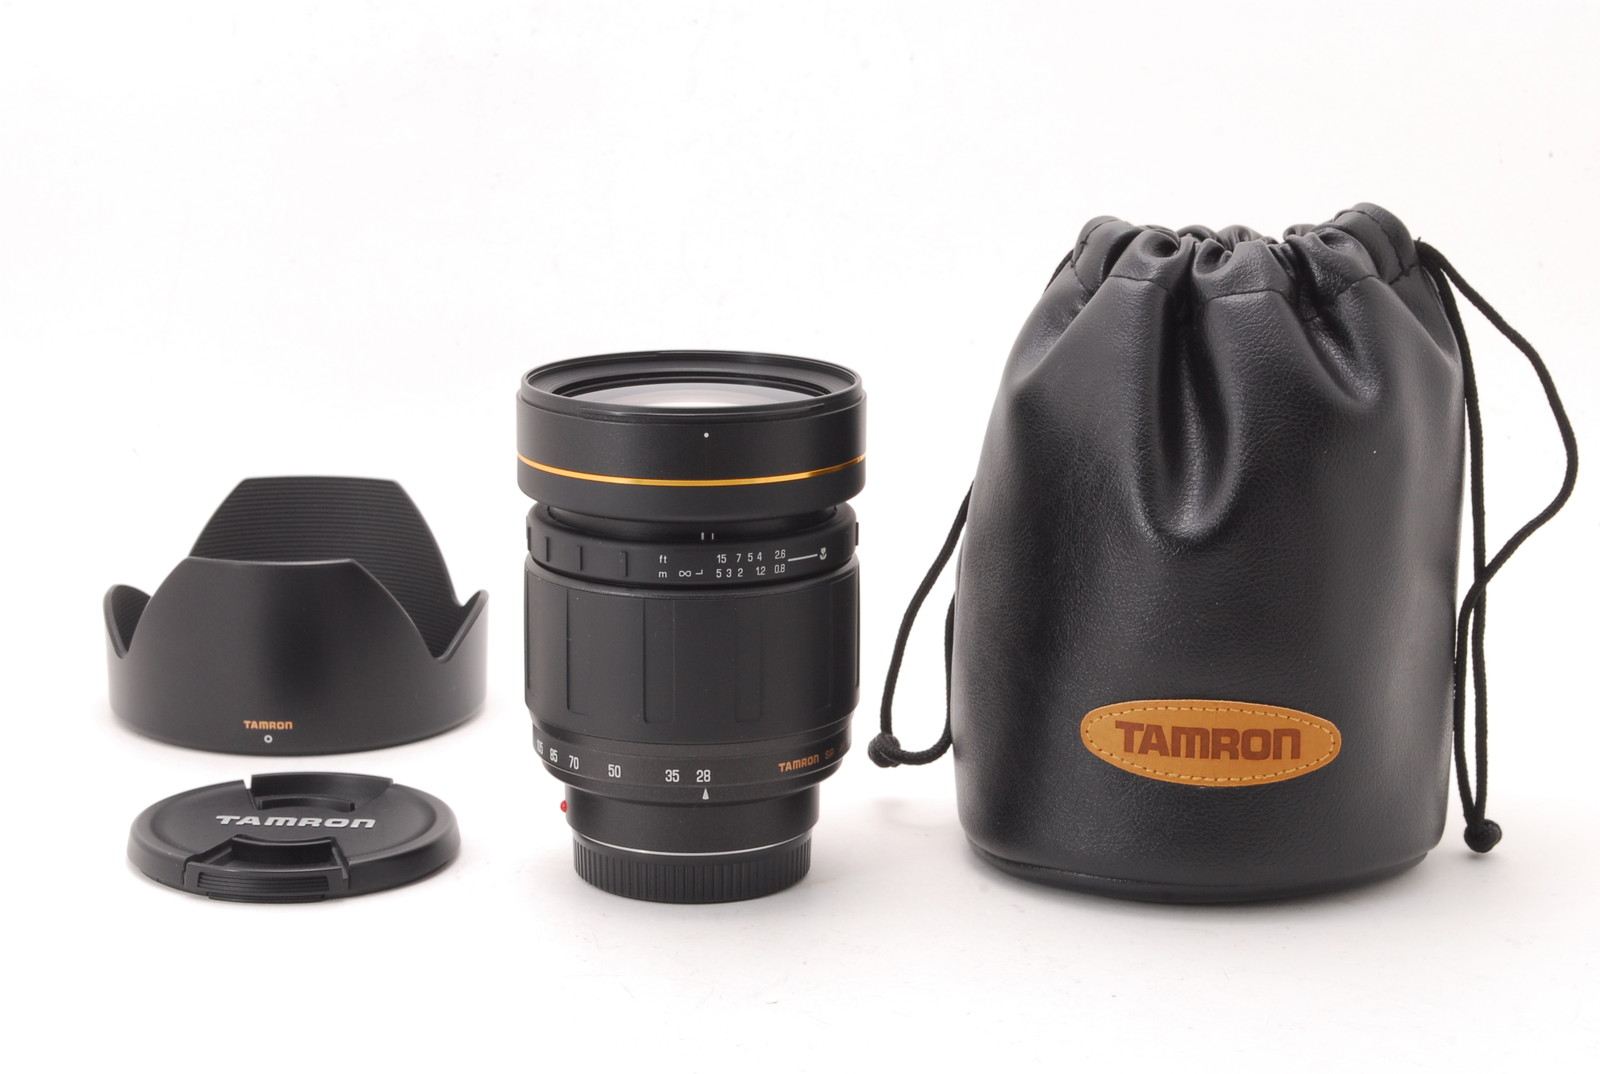 PROMOTION.NEAR MINT Tamron SP AF ASPHERICAL LD ( IF) 28-105mm f/2.8 for Minolta from Japan